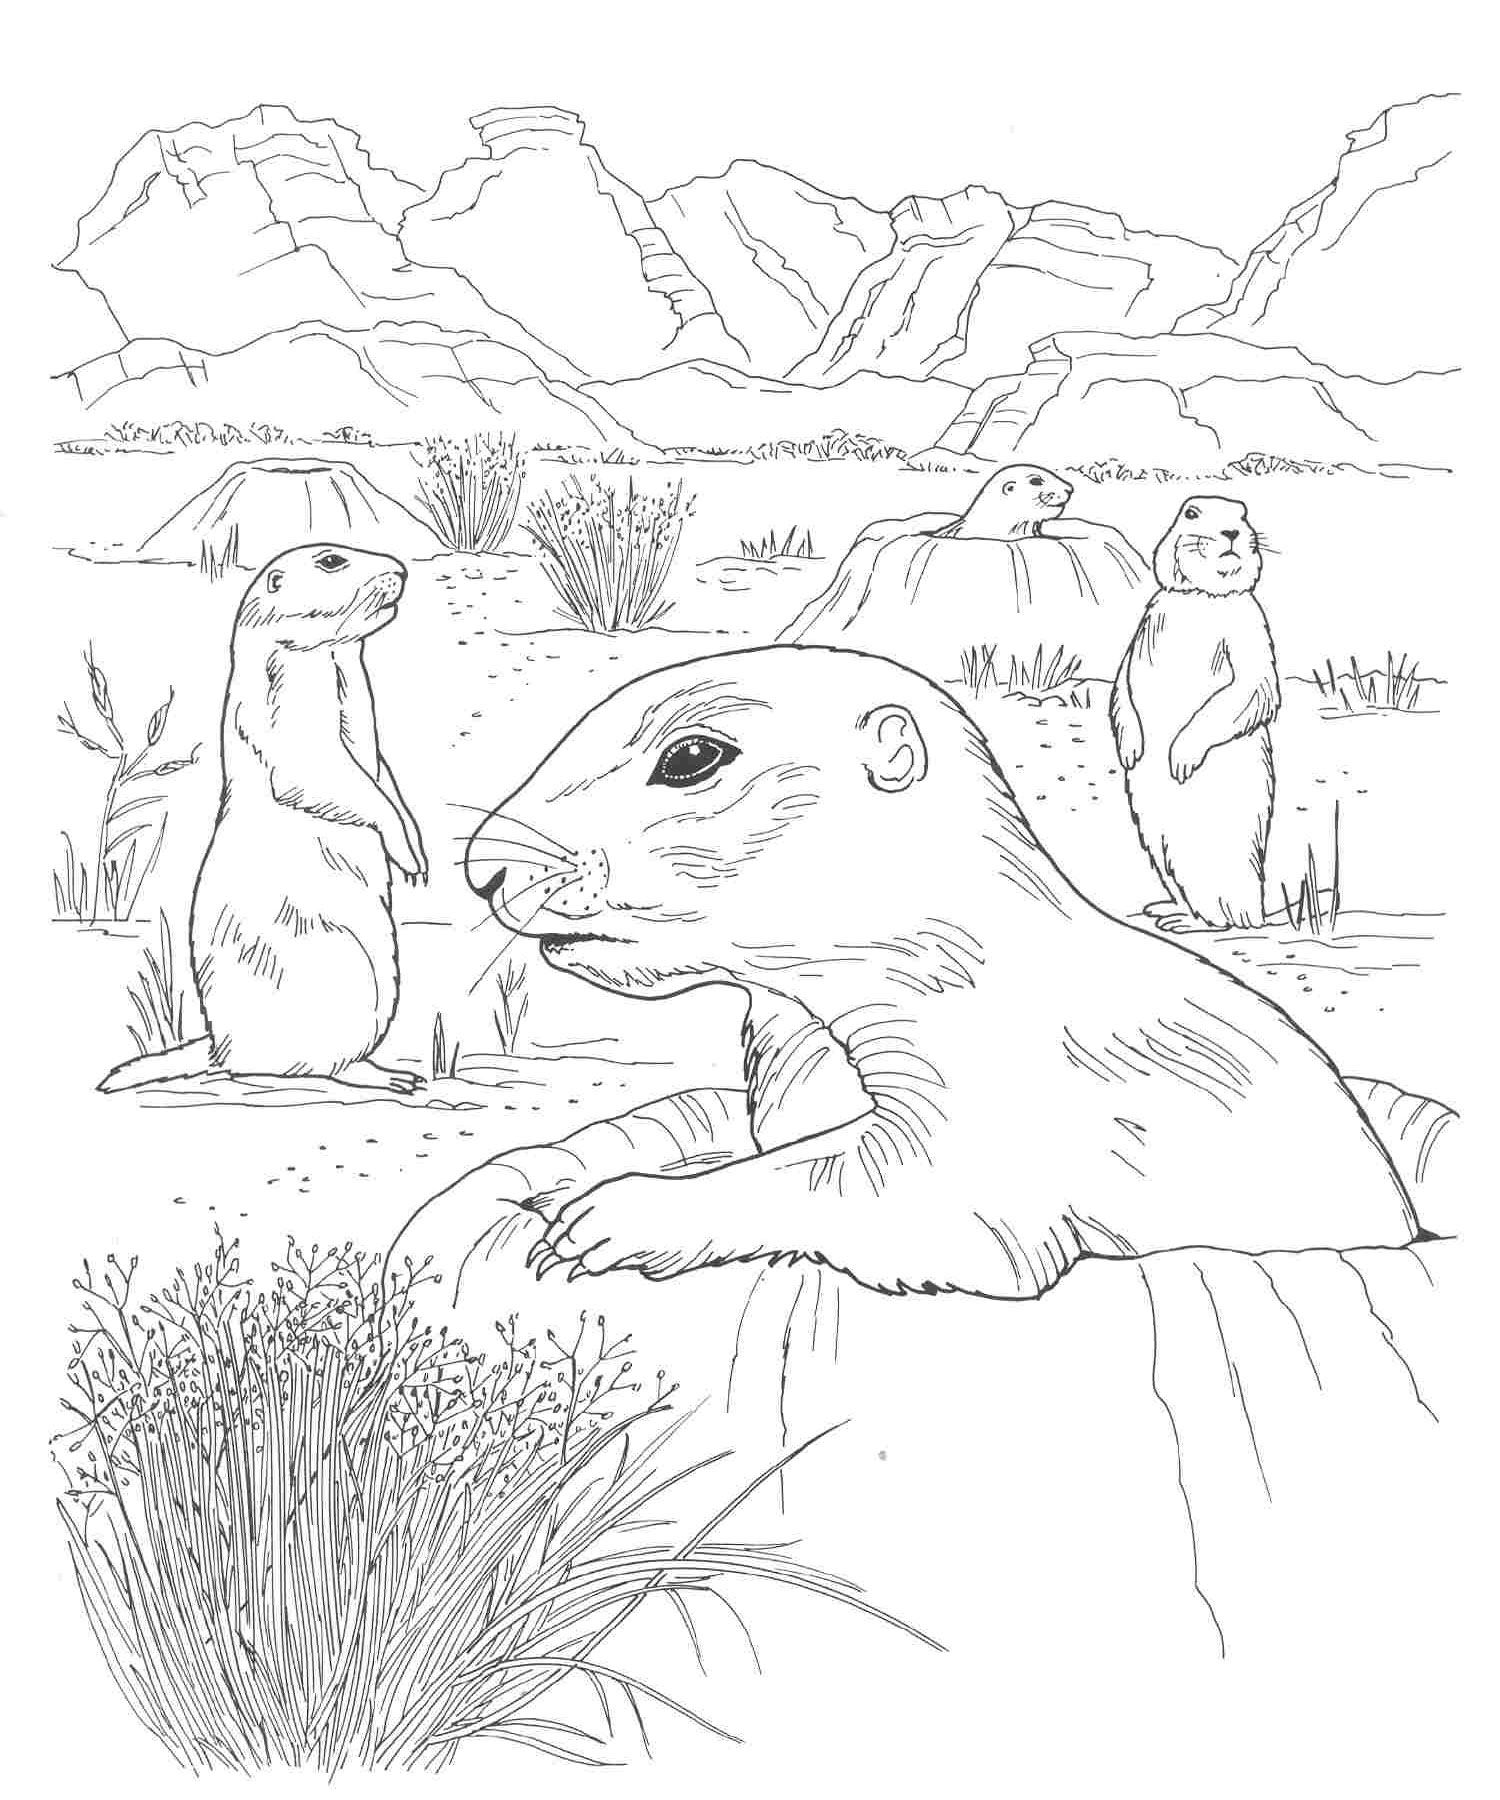 desert animals coloring pages